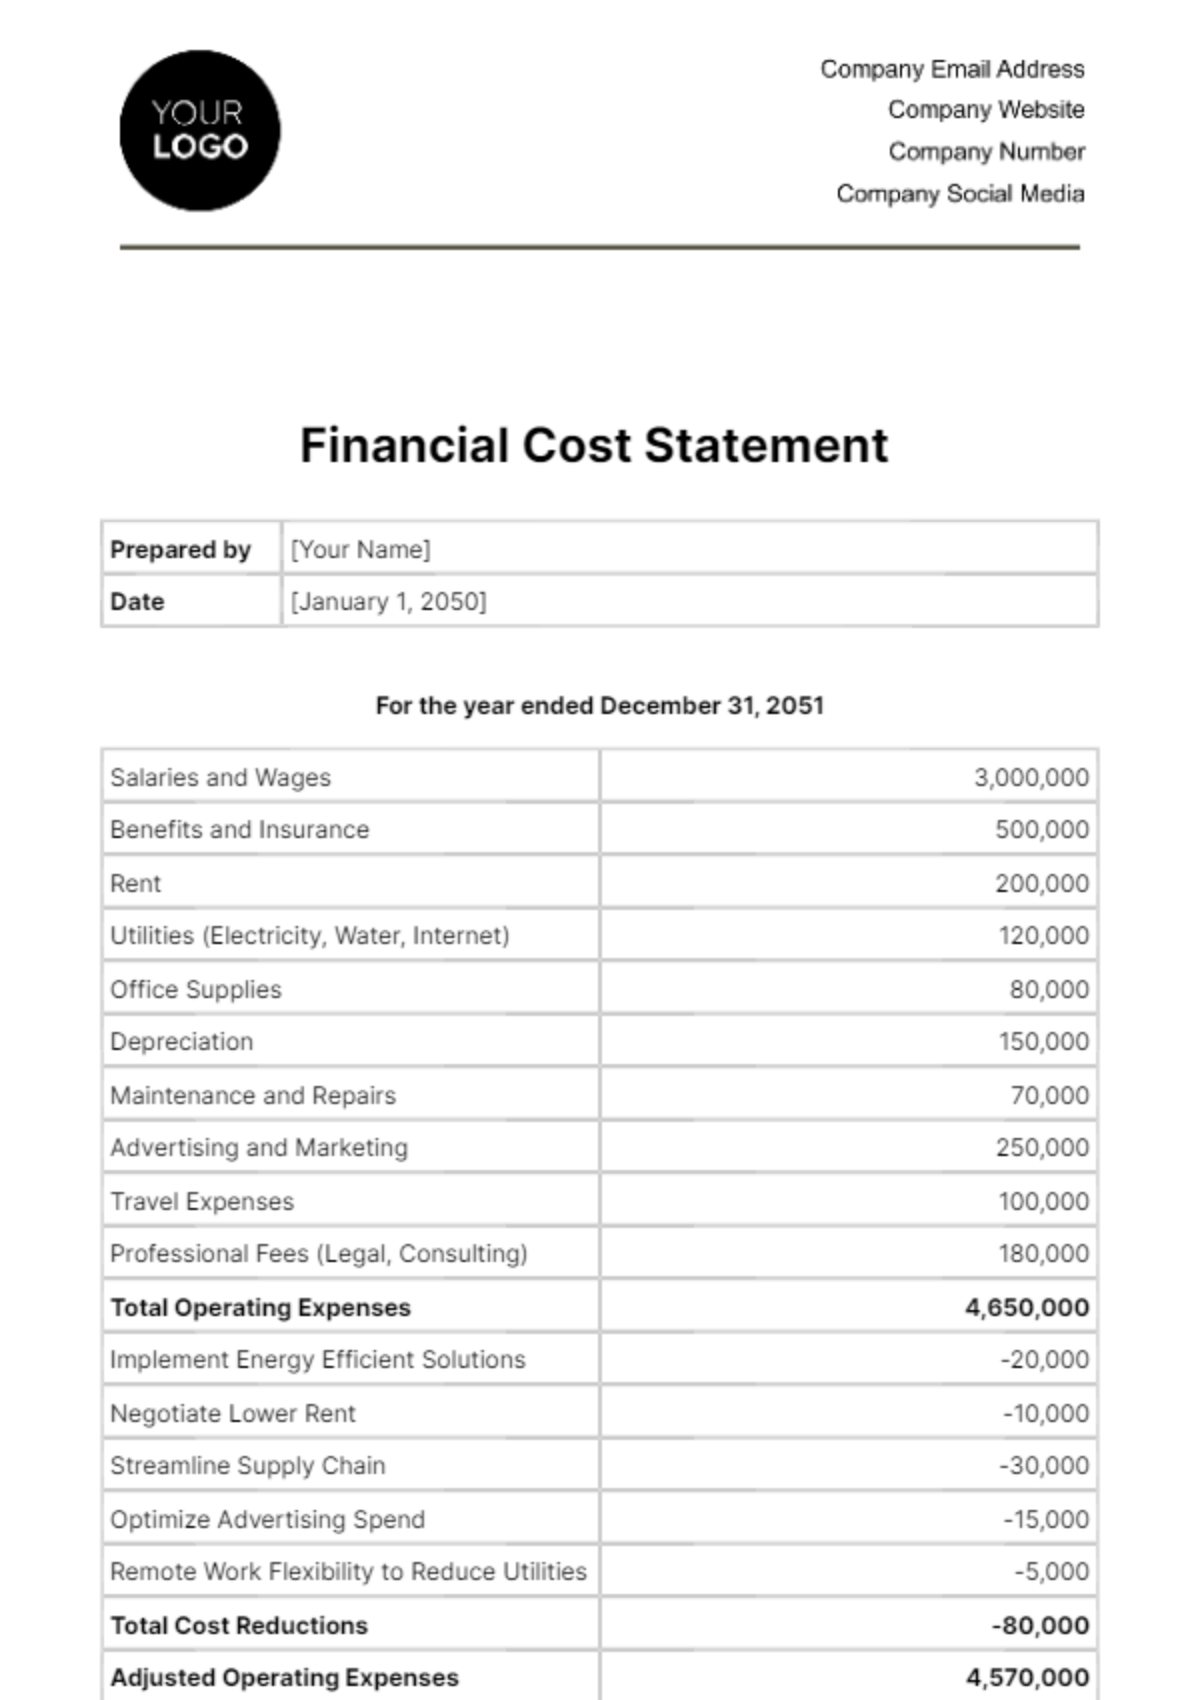 Free Financial Cost Statement Template